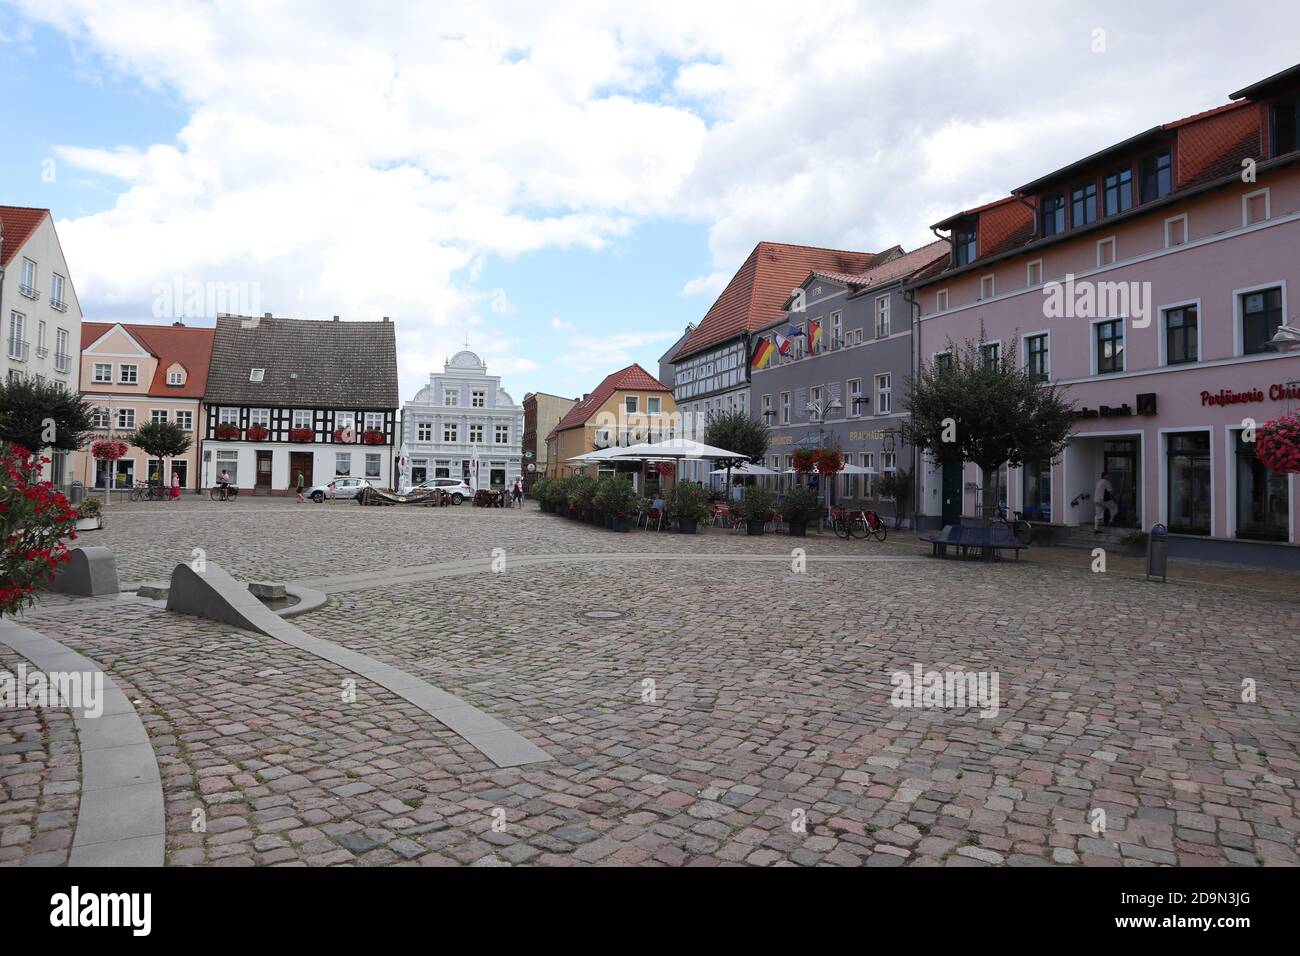 Ueckermuende, Mecklenburg-Vorpommern/ Germany - August 23 2020: central market square with traditional houses in the North of Germany Stock Photo